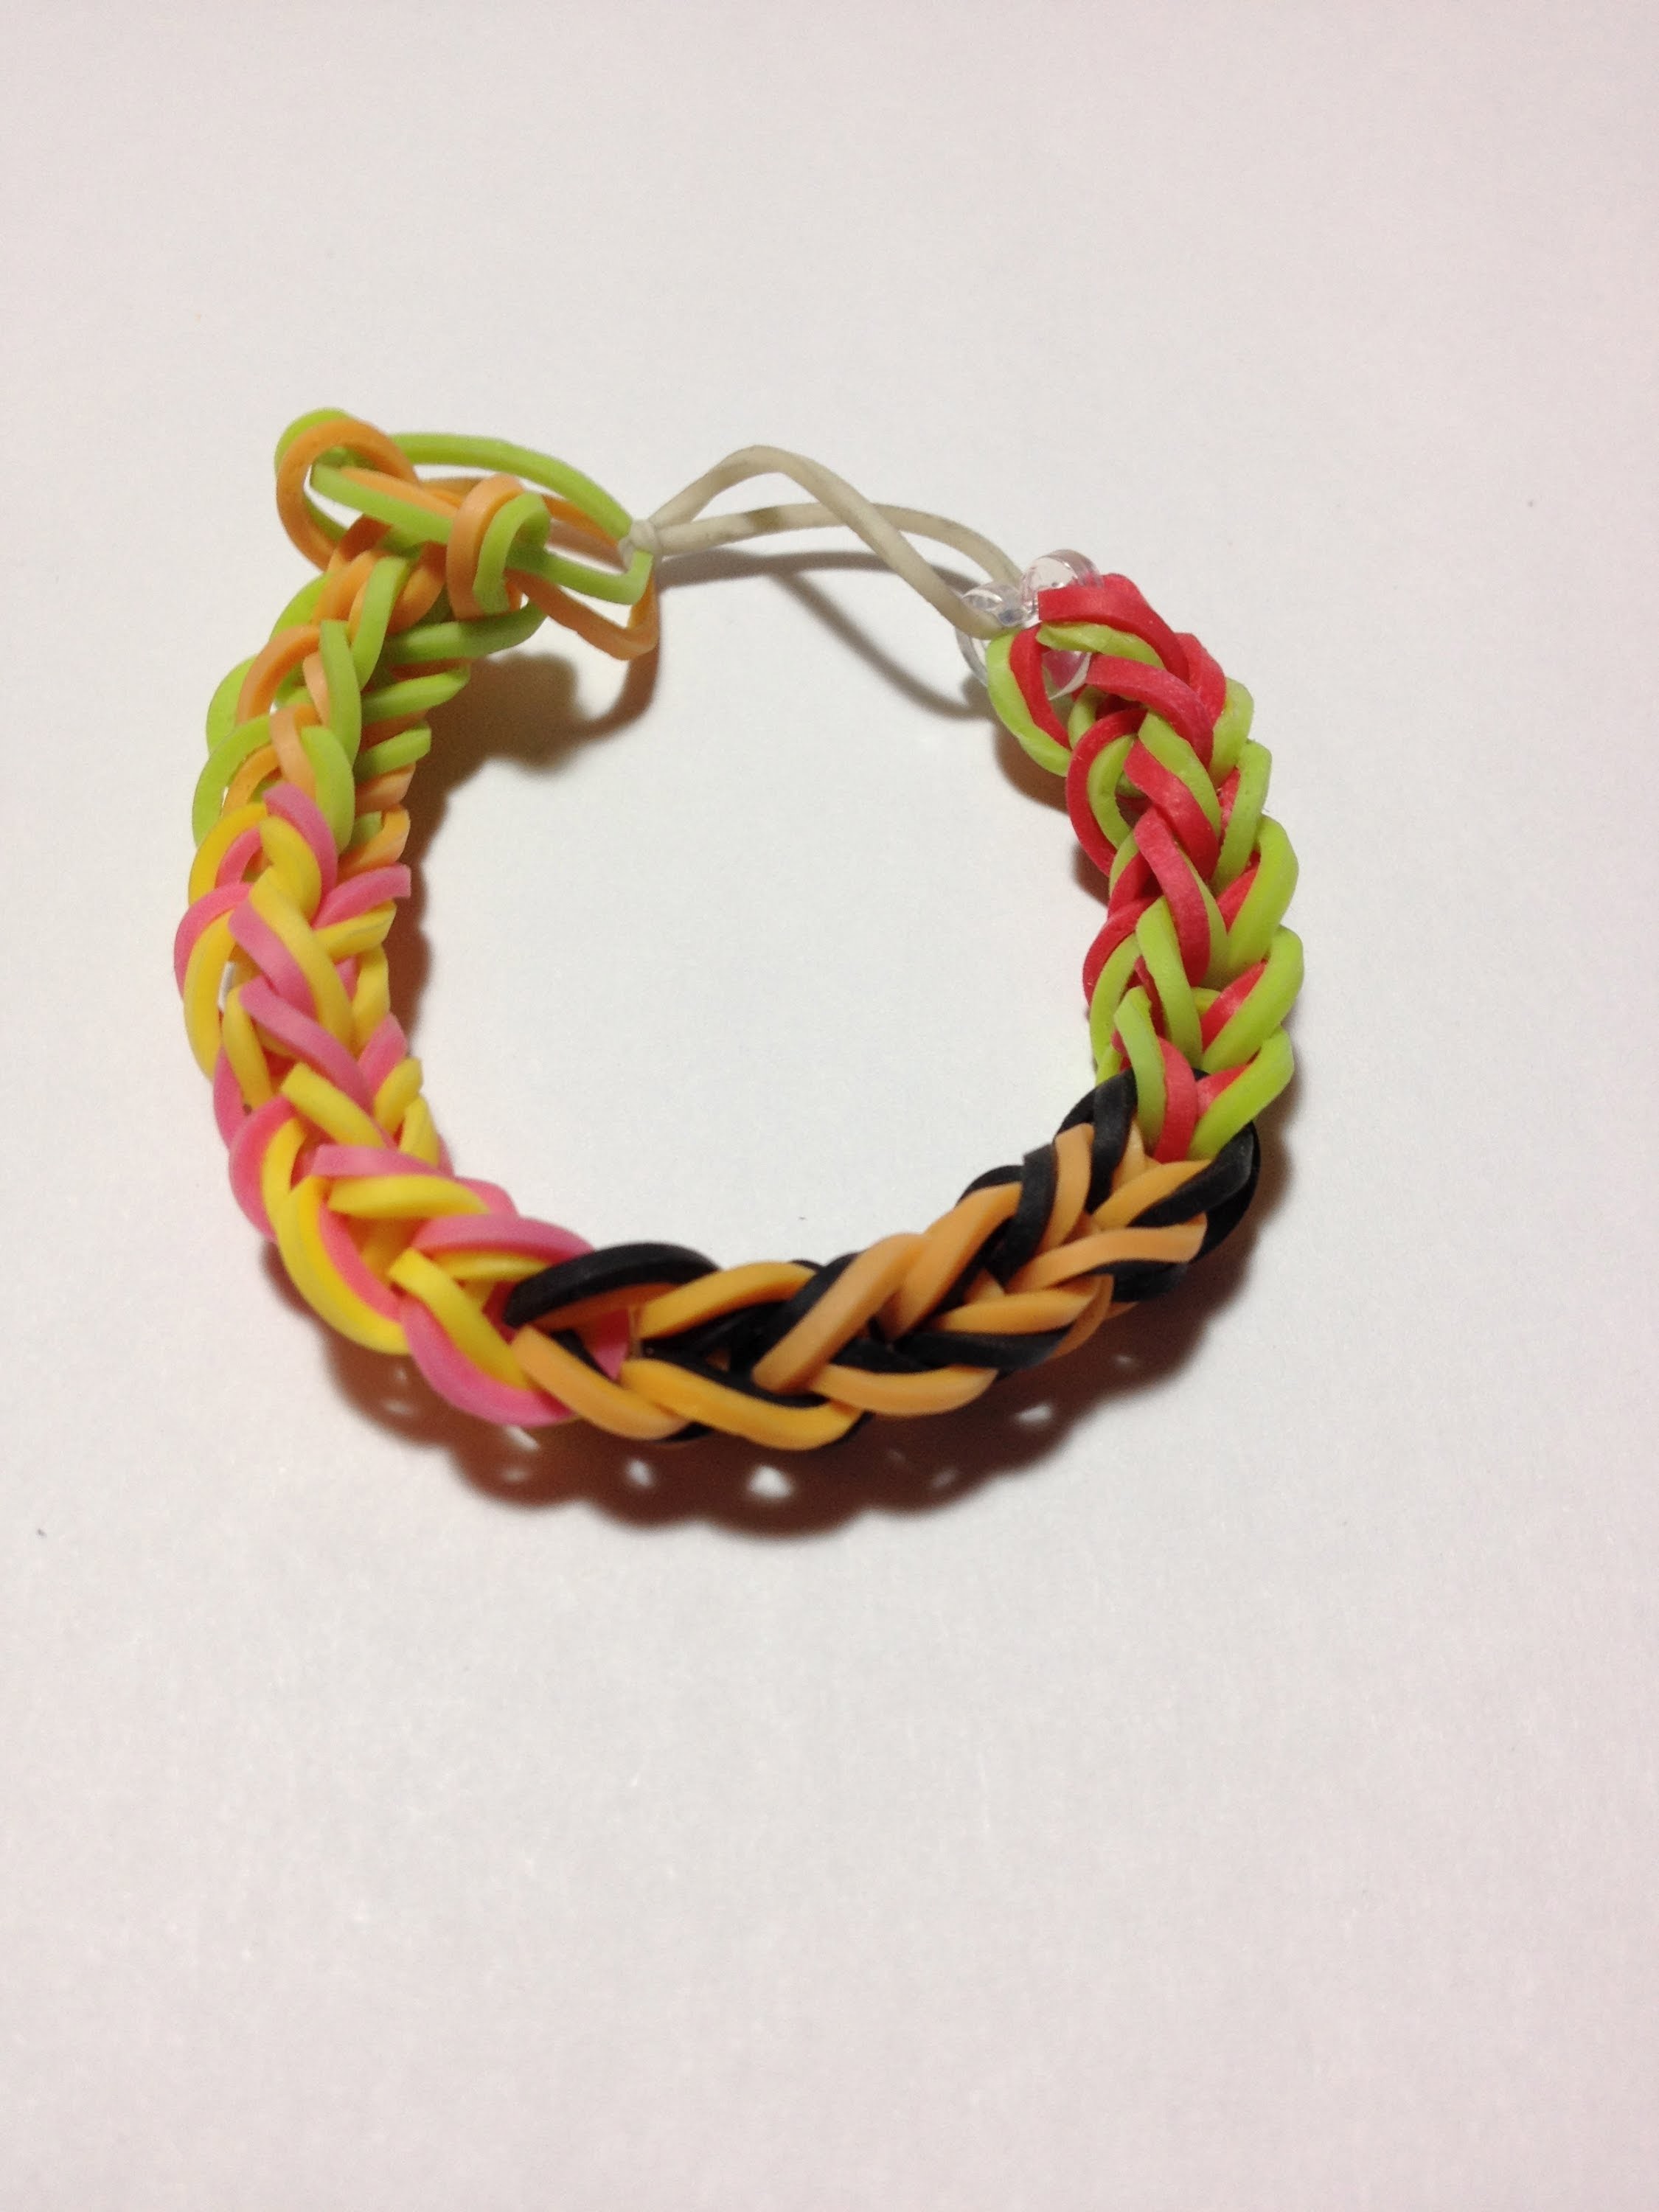 How to make a rainbow loom tie dye bracelet without tie dye bands